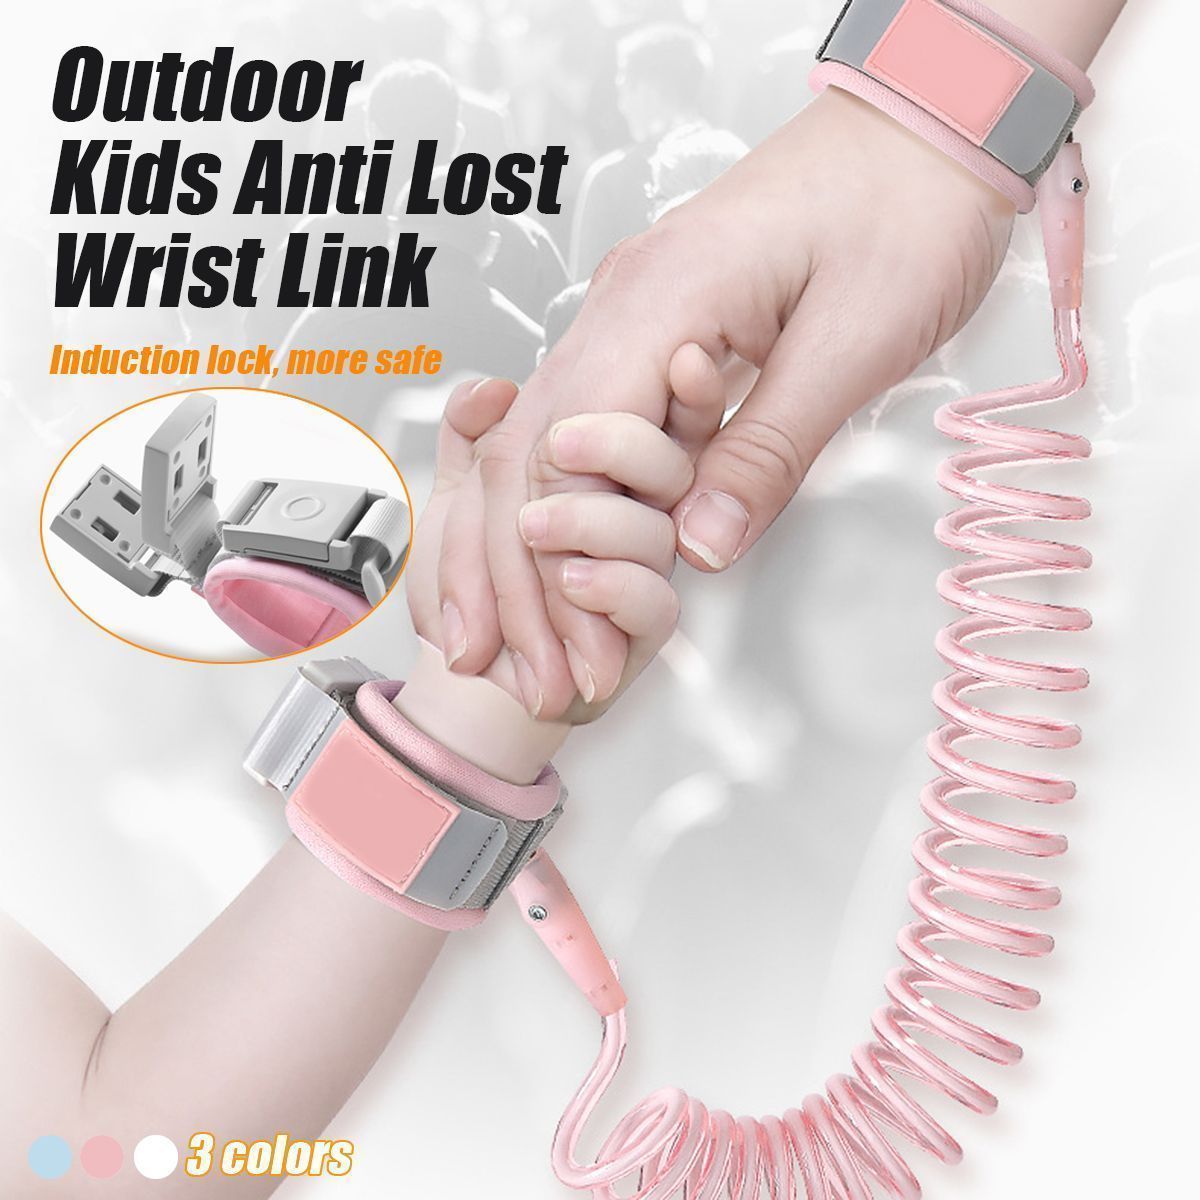 Child-Kid-Induction-lock-Anti-lost-Safety-Leash-Wrist-Link-Harness-Strap-Reins-Traction-Rope-Anti-Lo-1563141